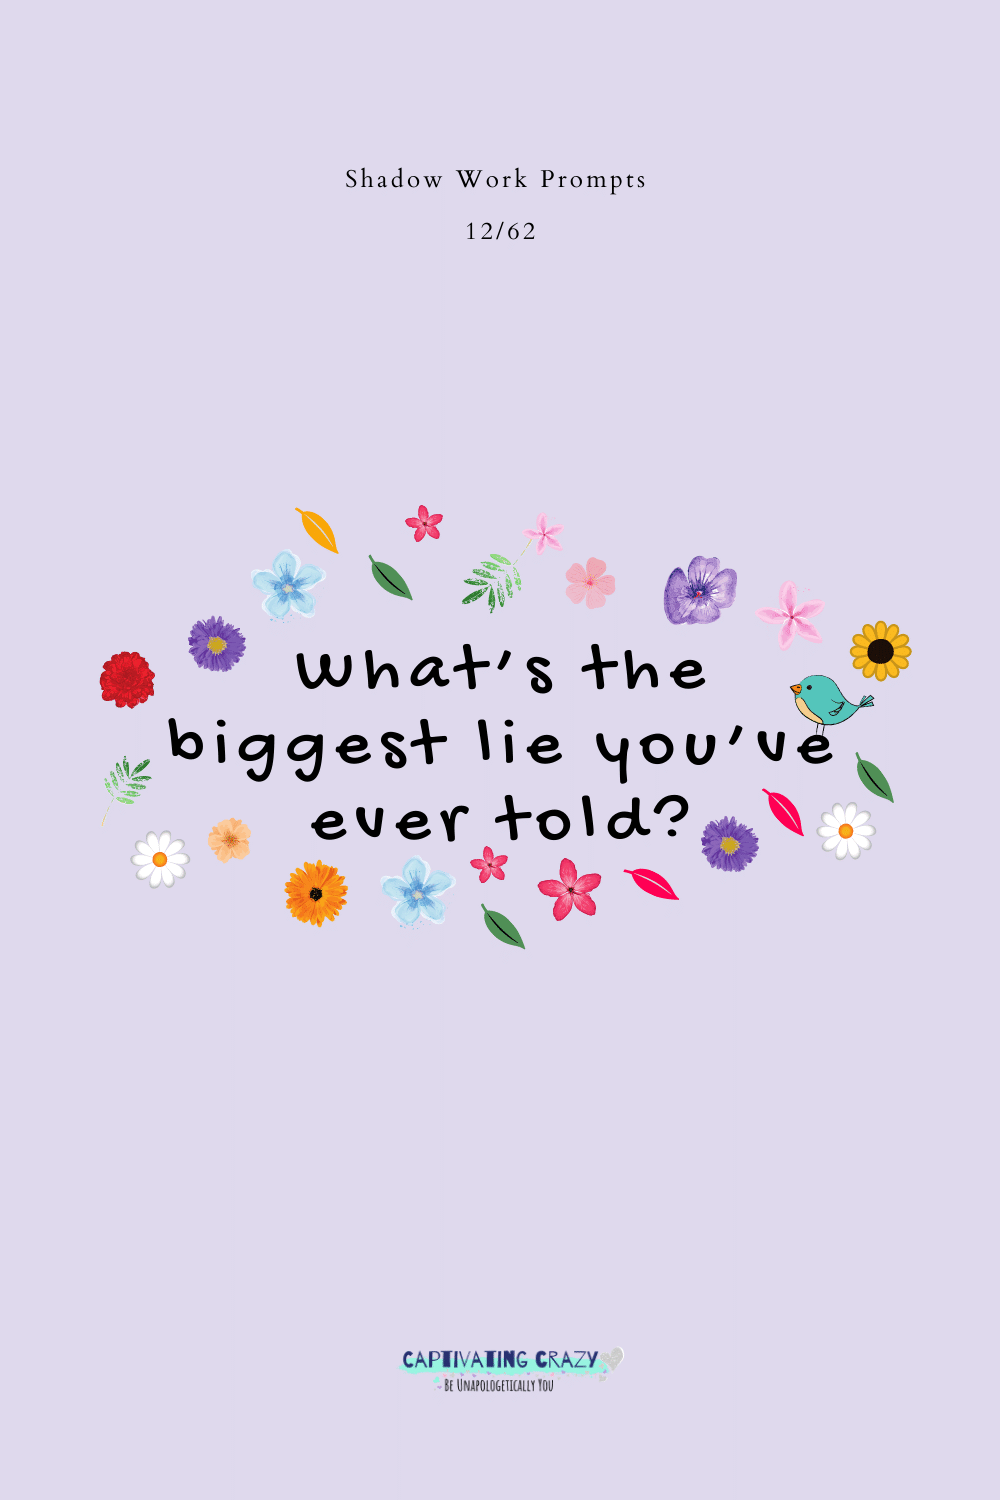 What's the biggest lie you've ever told?